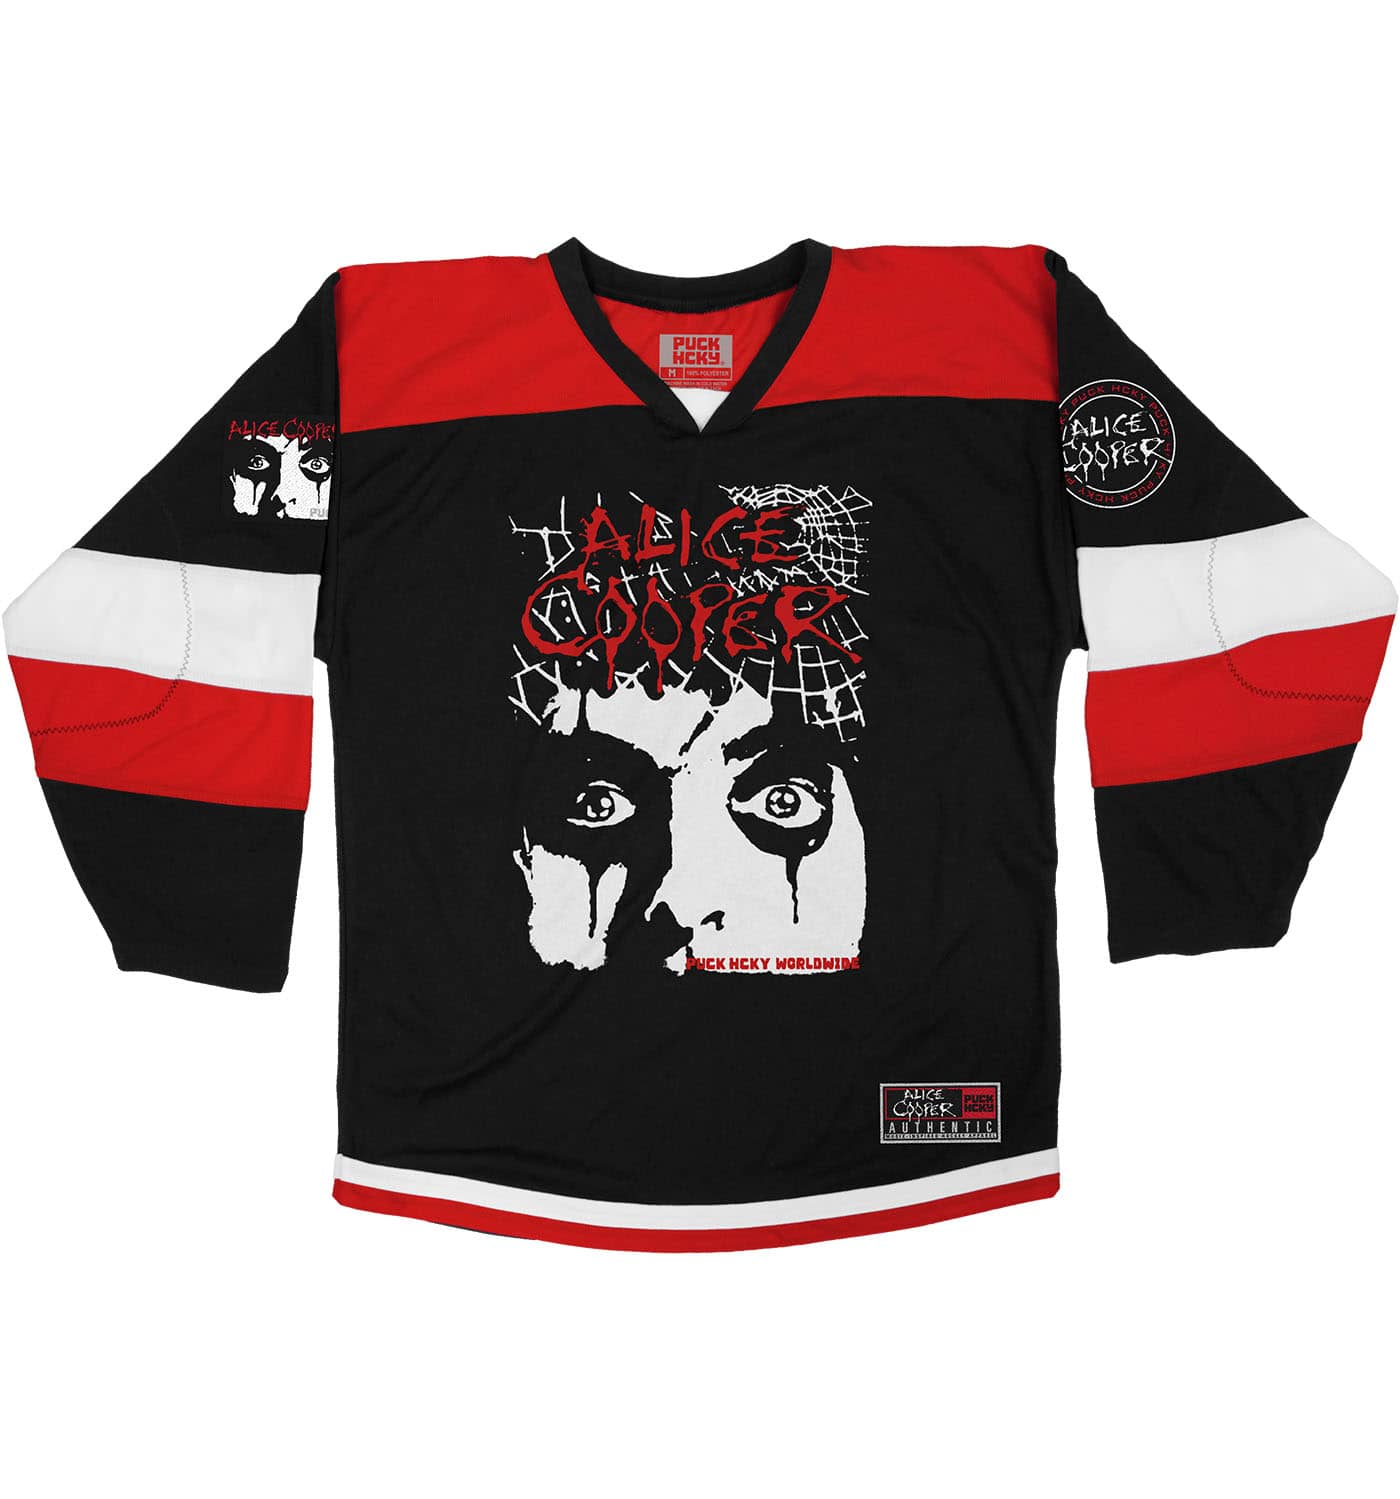 Alice Cooper 'The Spiders' Hockey Jersey, Black/Red/White / L